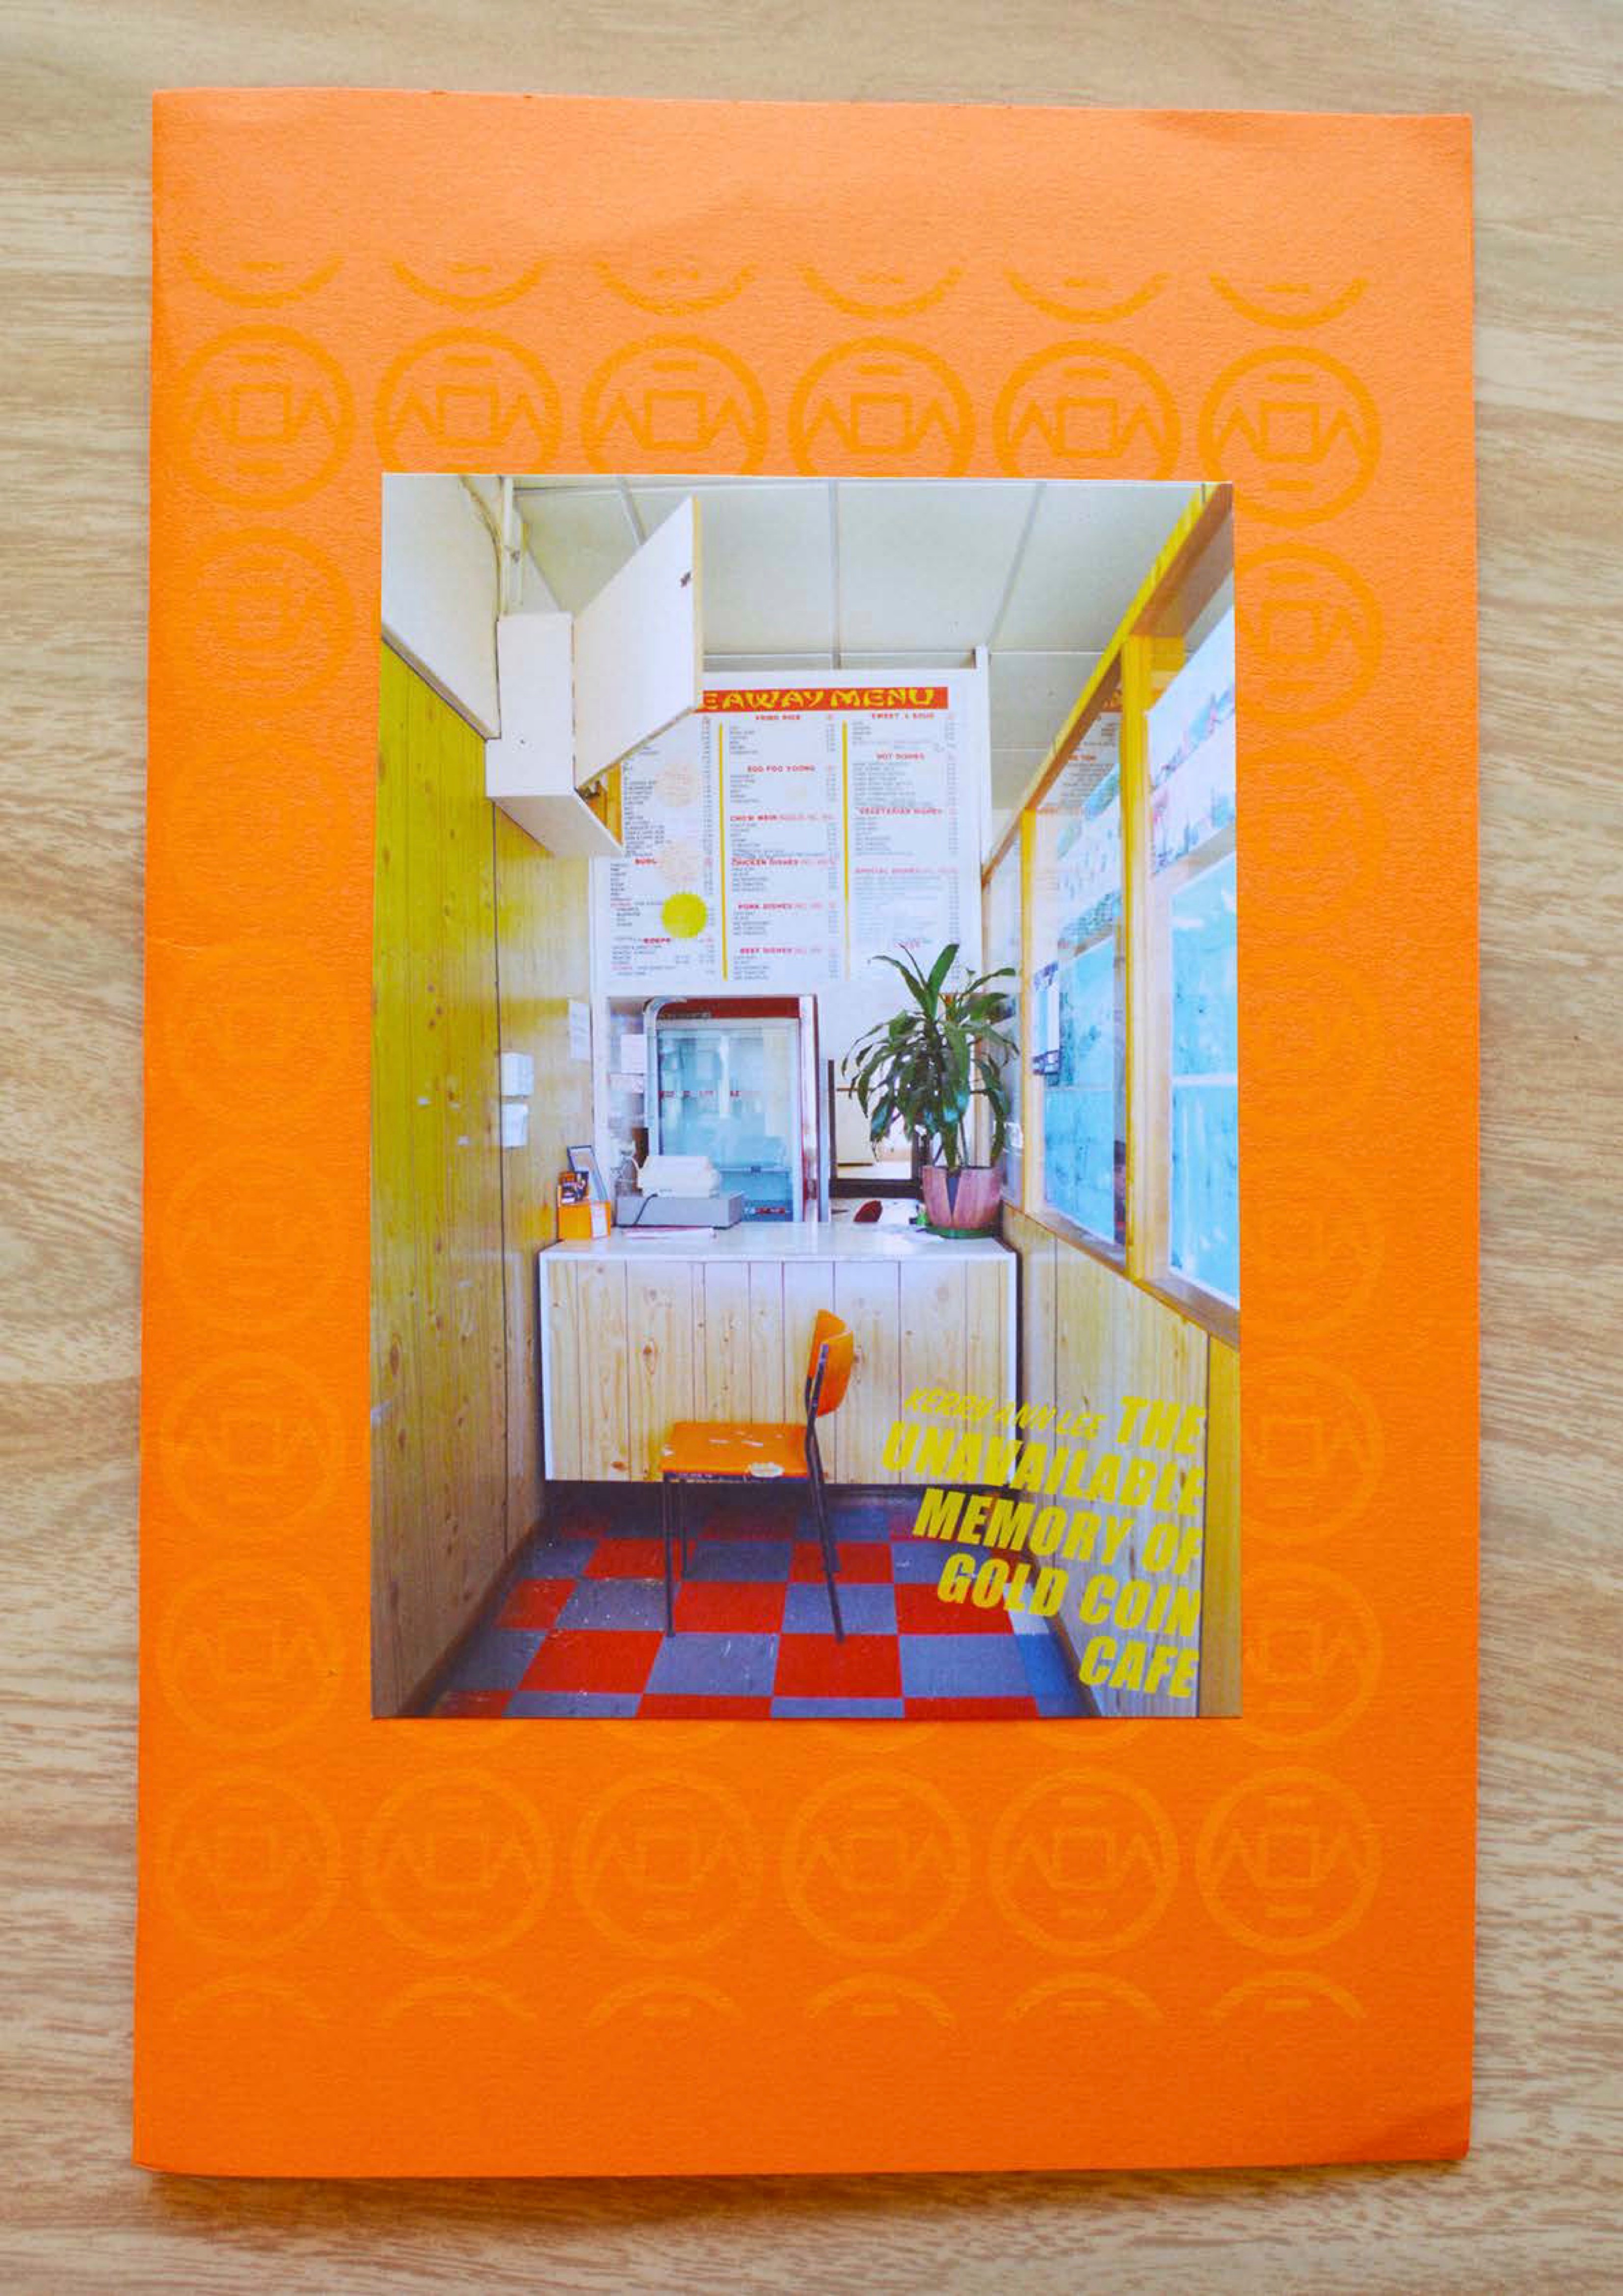 Photograph of the counter of a takeaway shop stuck onto a bright orange zine cover